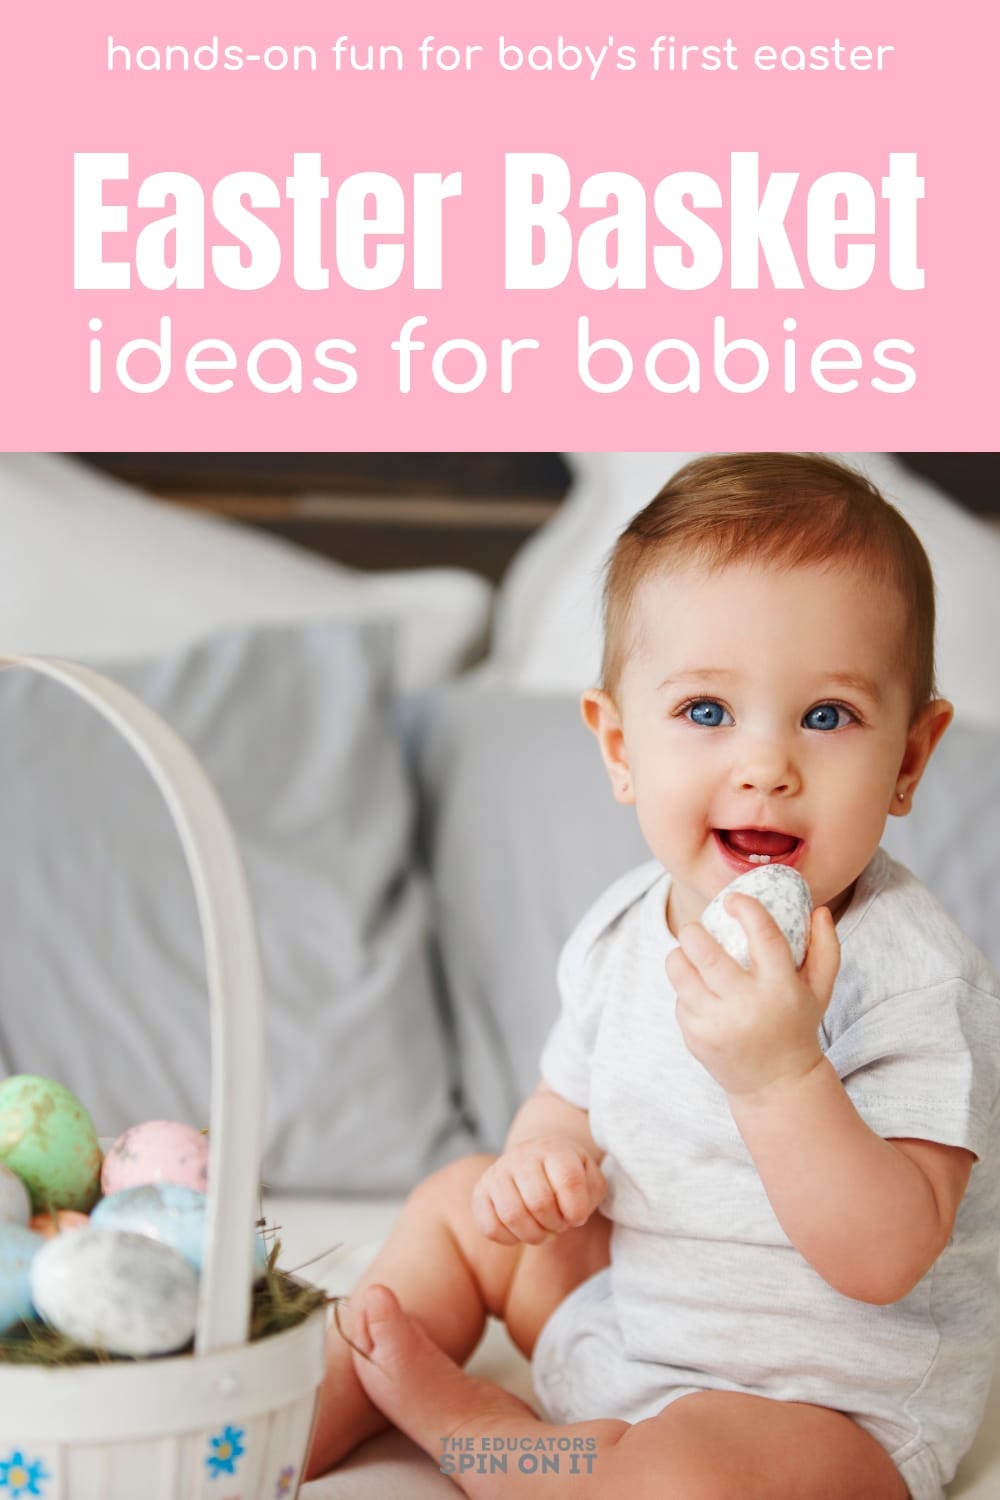 https://theeducatorsspinonit.com/wp-content/uploads/2012/03/easter-basket-ideas-for-babies.jpg